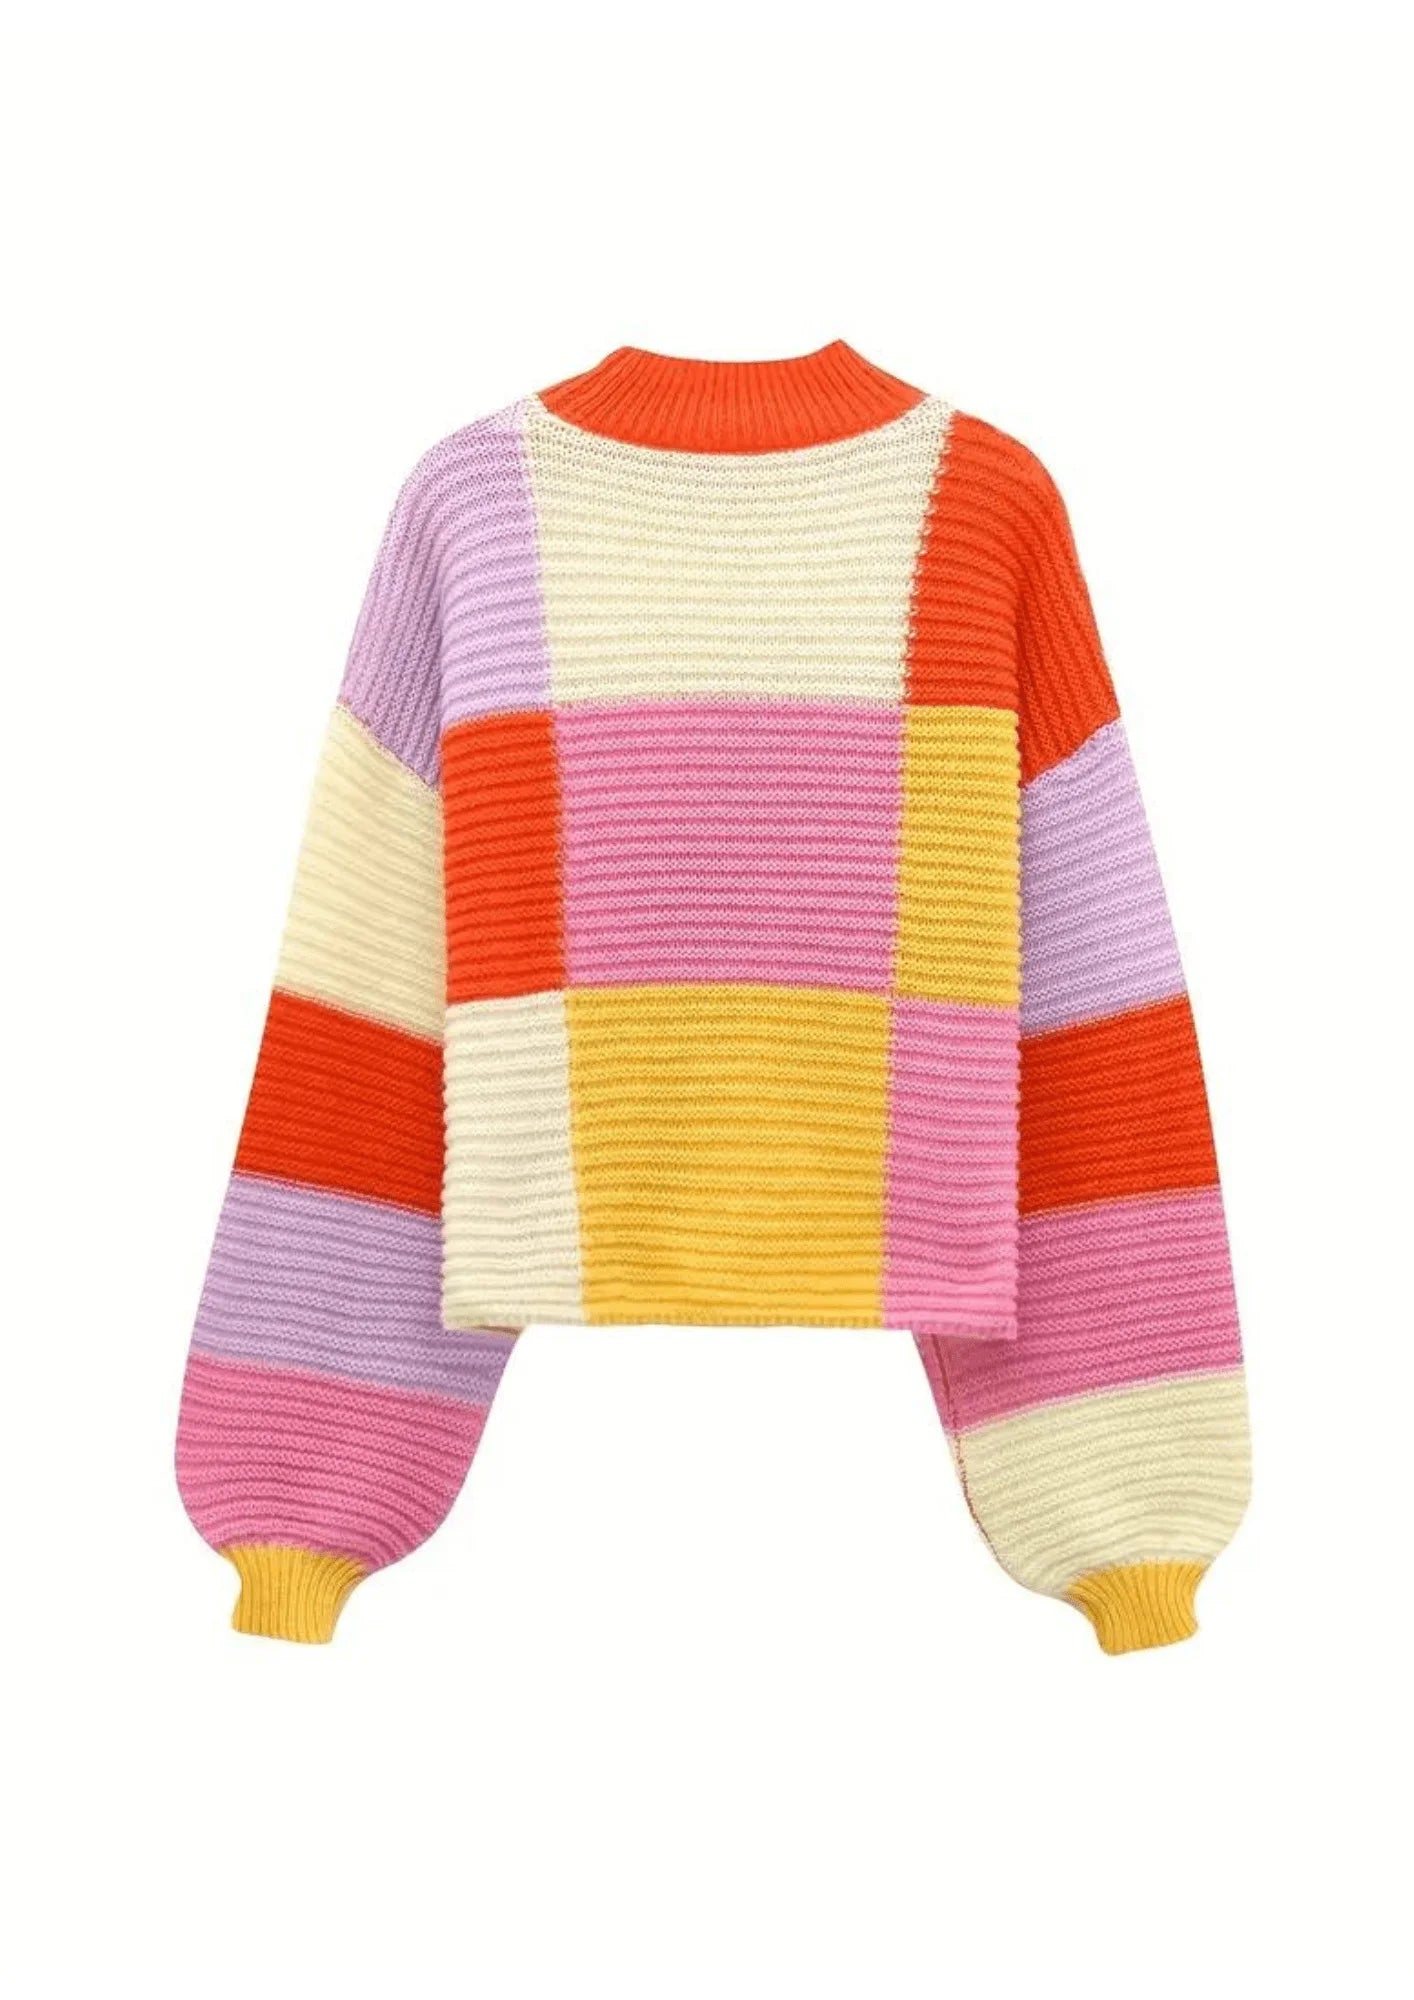 MULTICOLORED KNITTED JUMPER